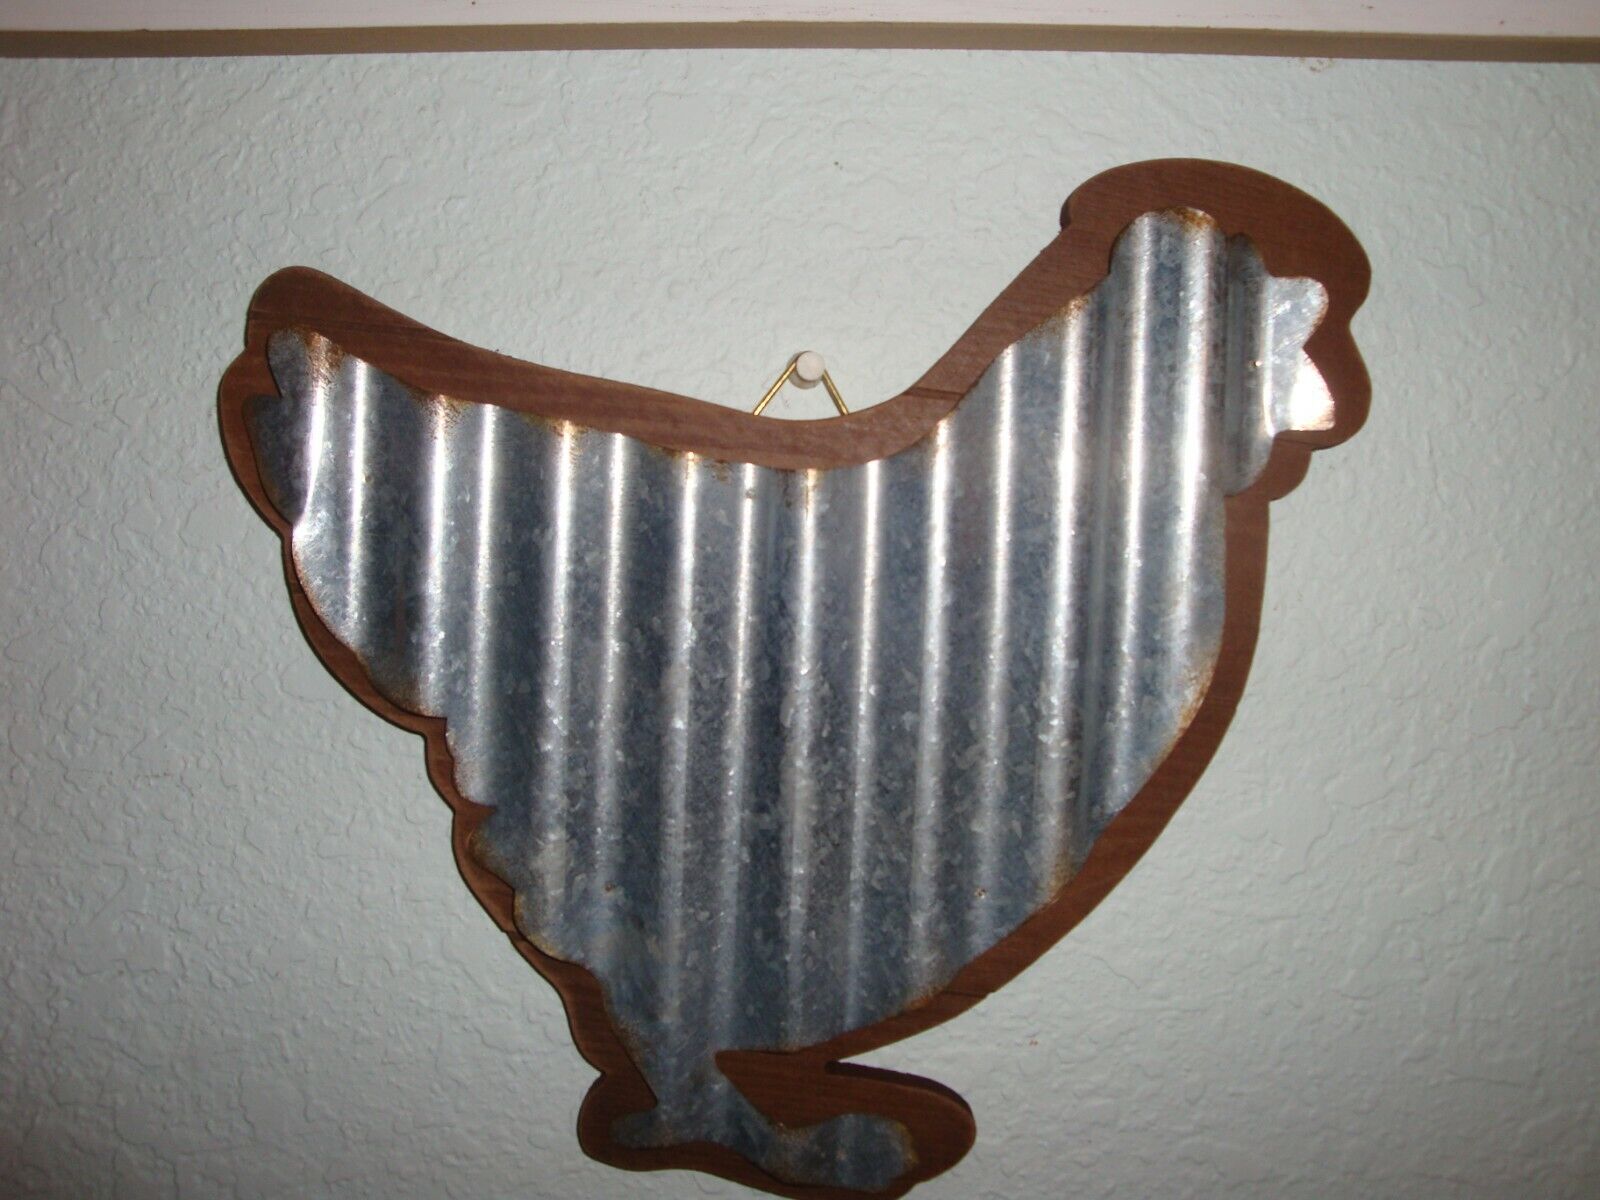 New Wooden and Metal Chicken Wall Hanging-Farmhouse/Ranch Decor-11 X 11